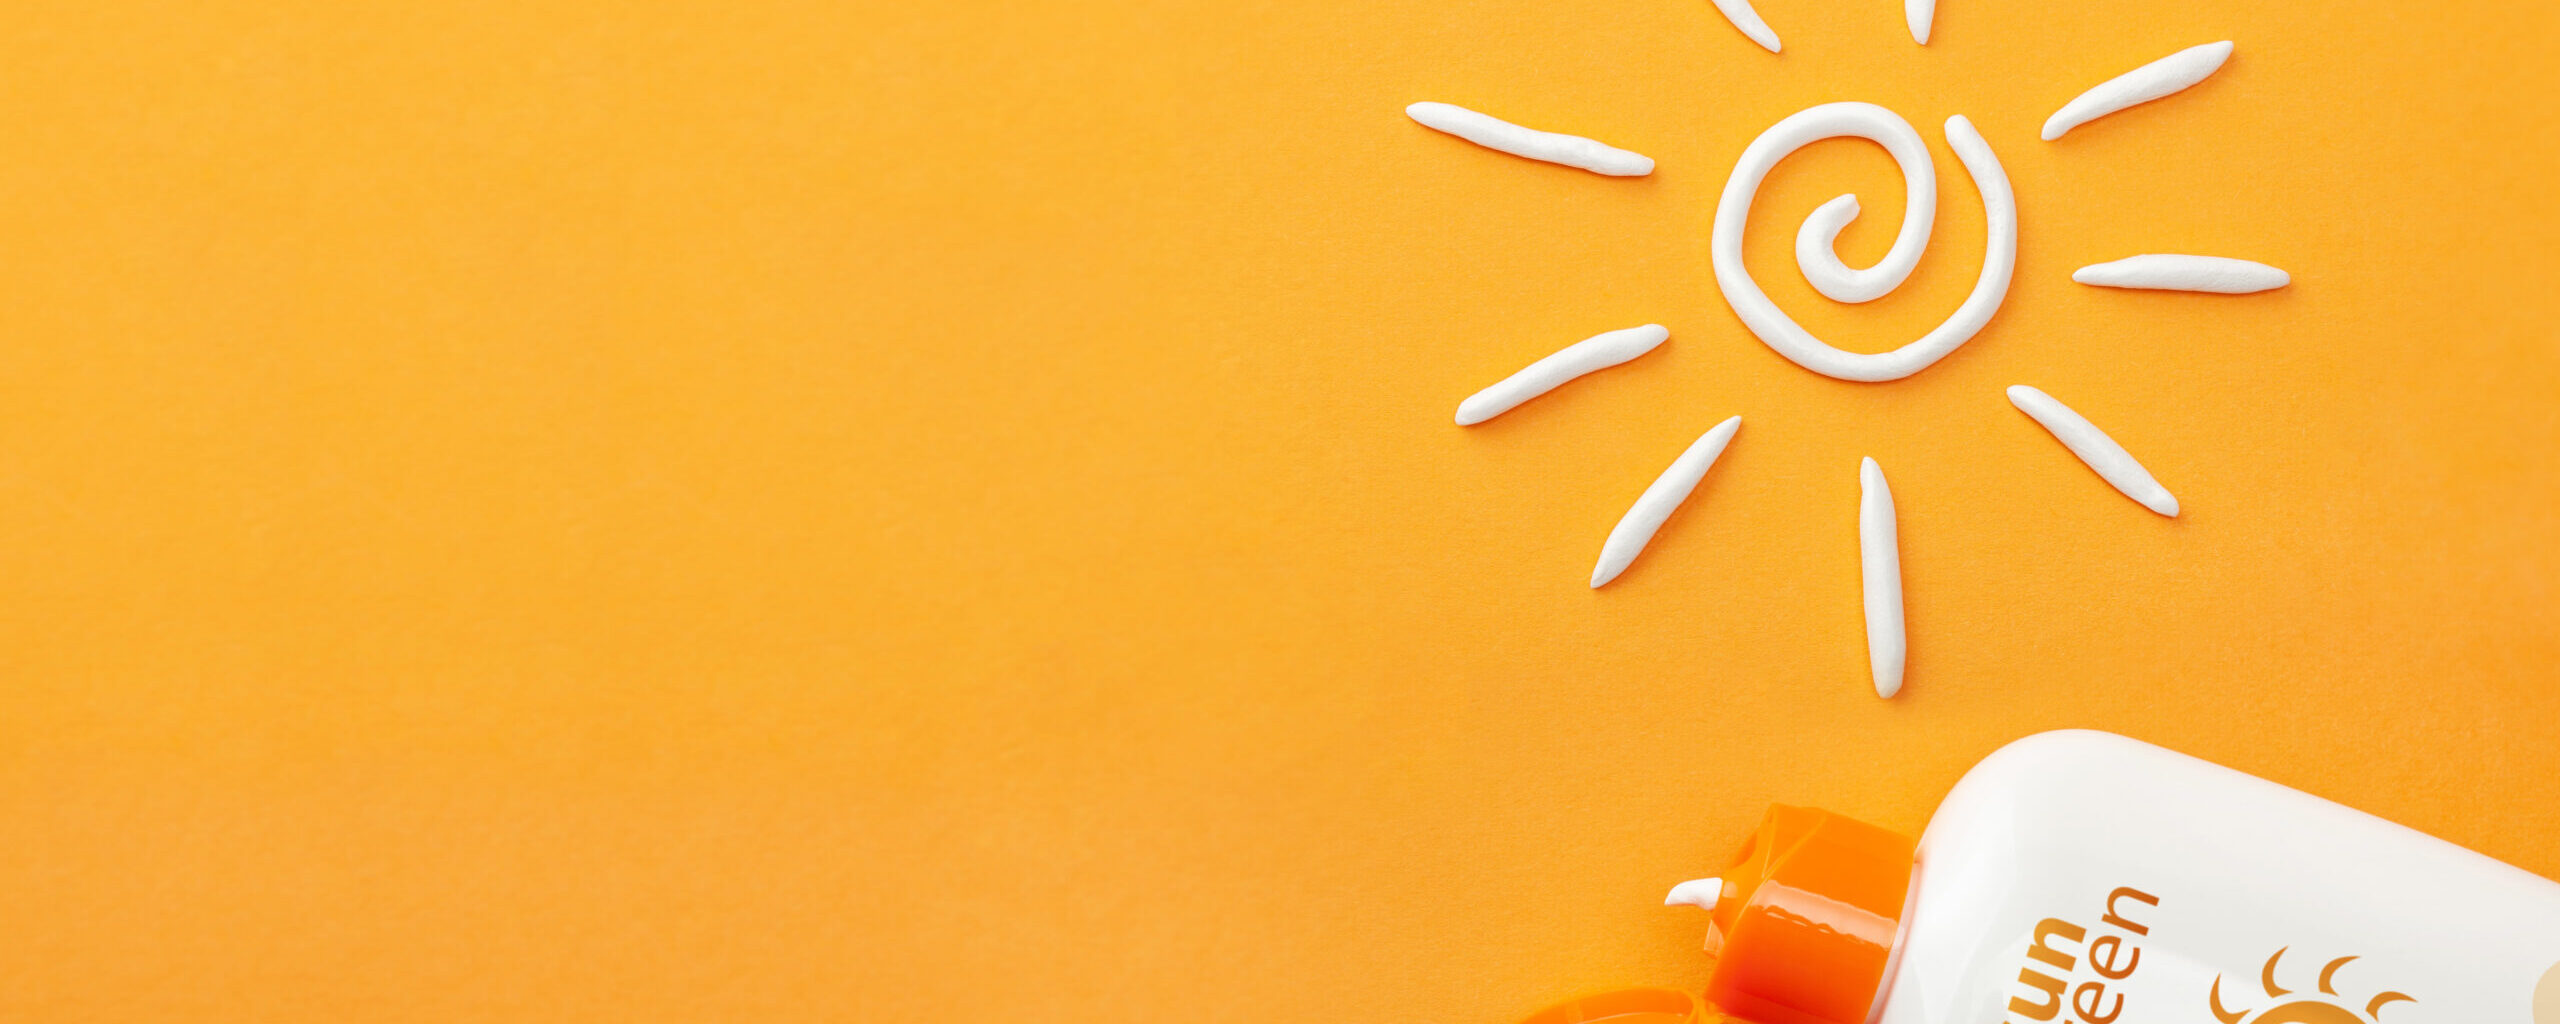 Sun-Related Health Risks: How Pharmacists Can Promote Sun Safety